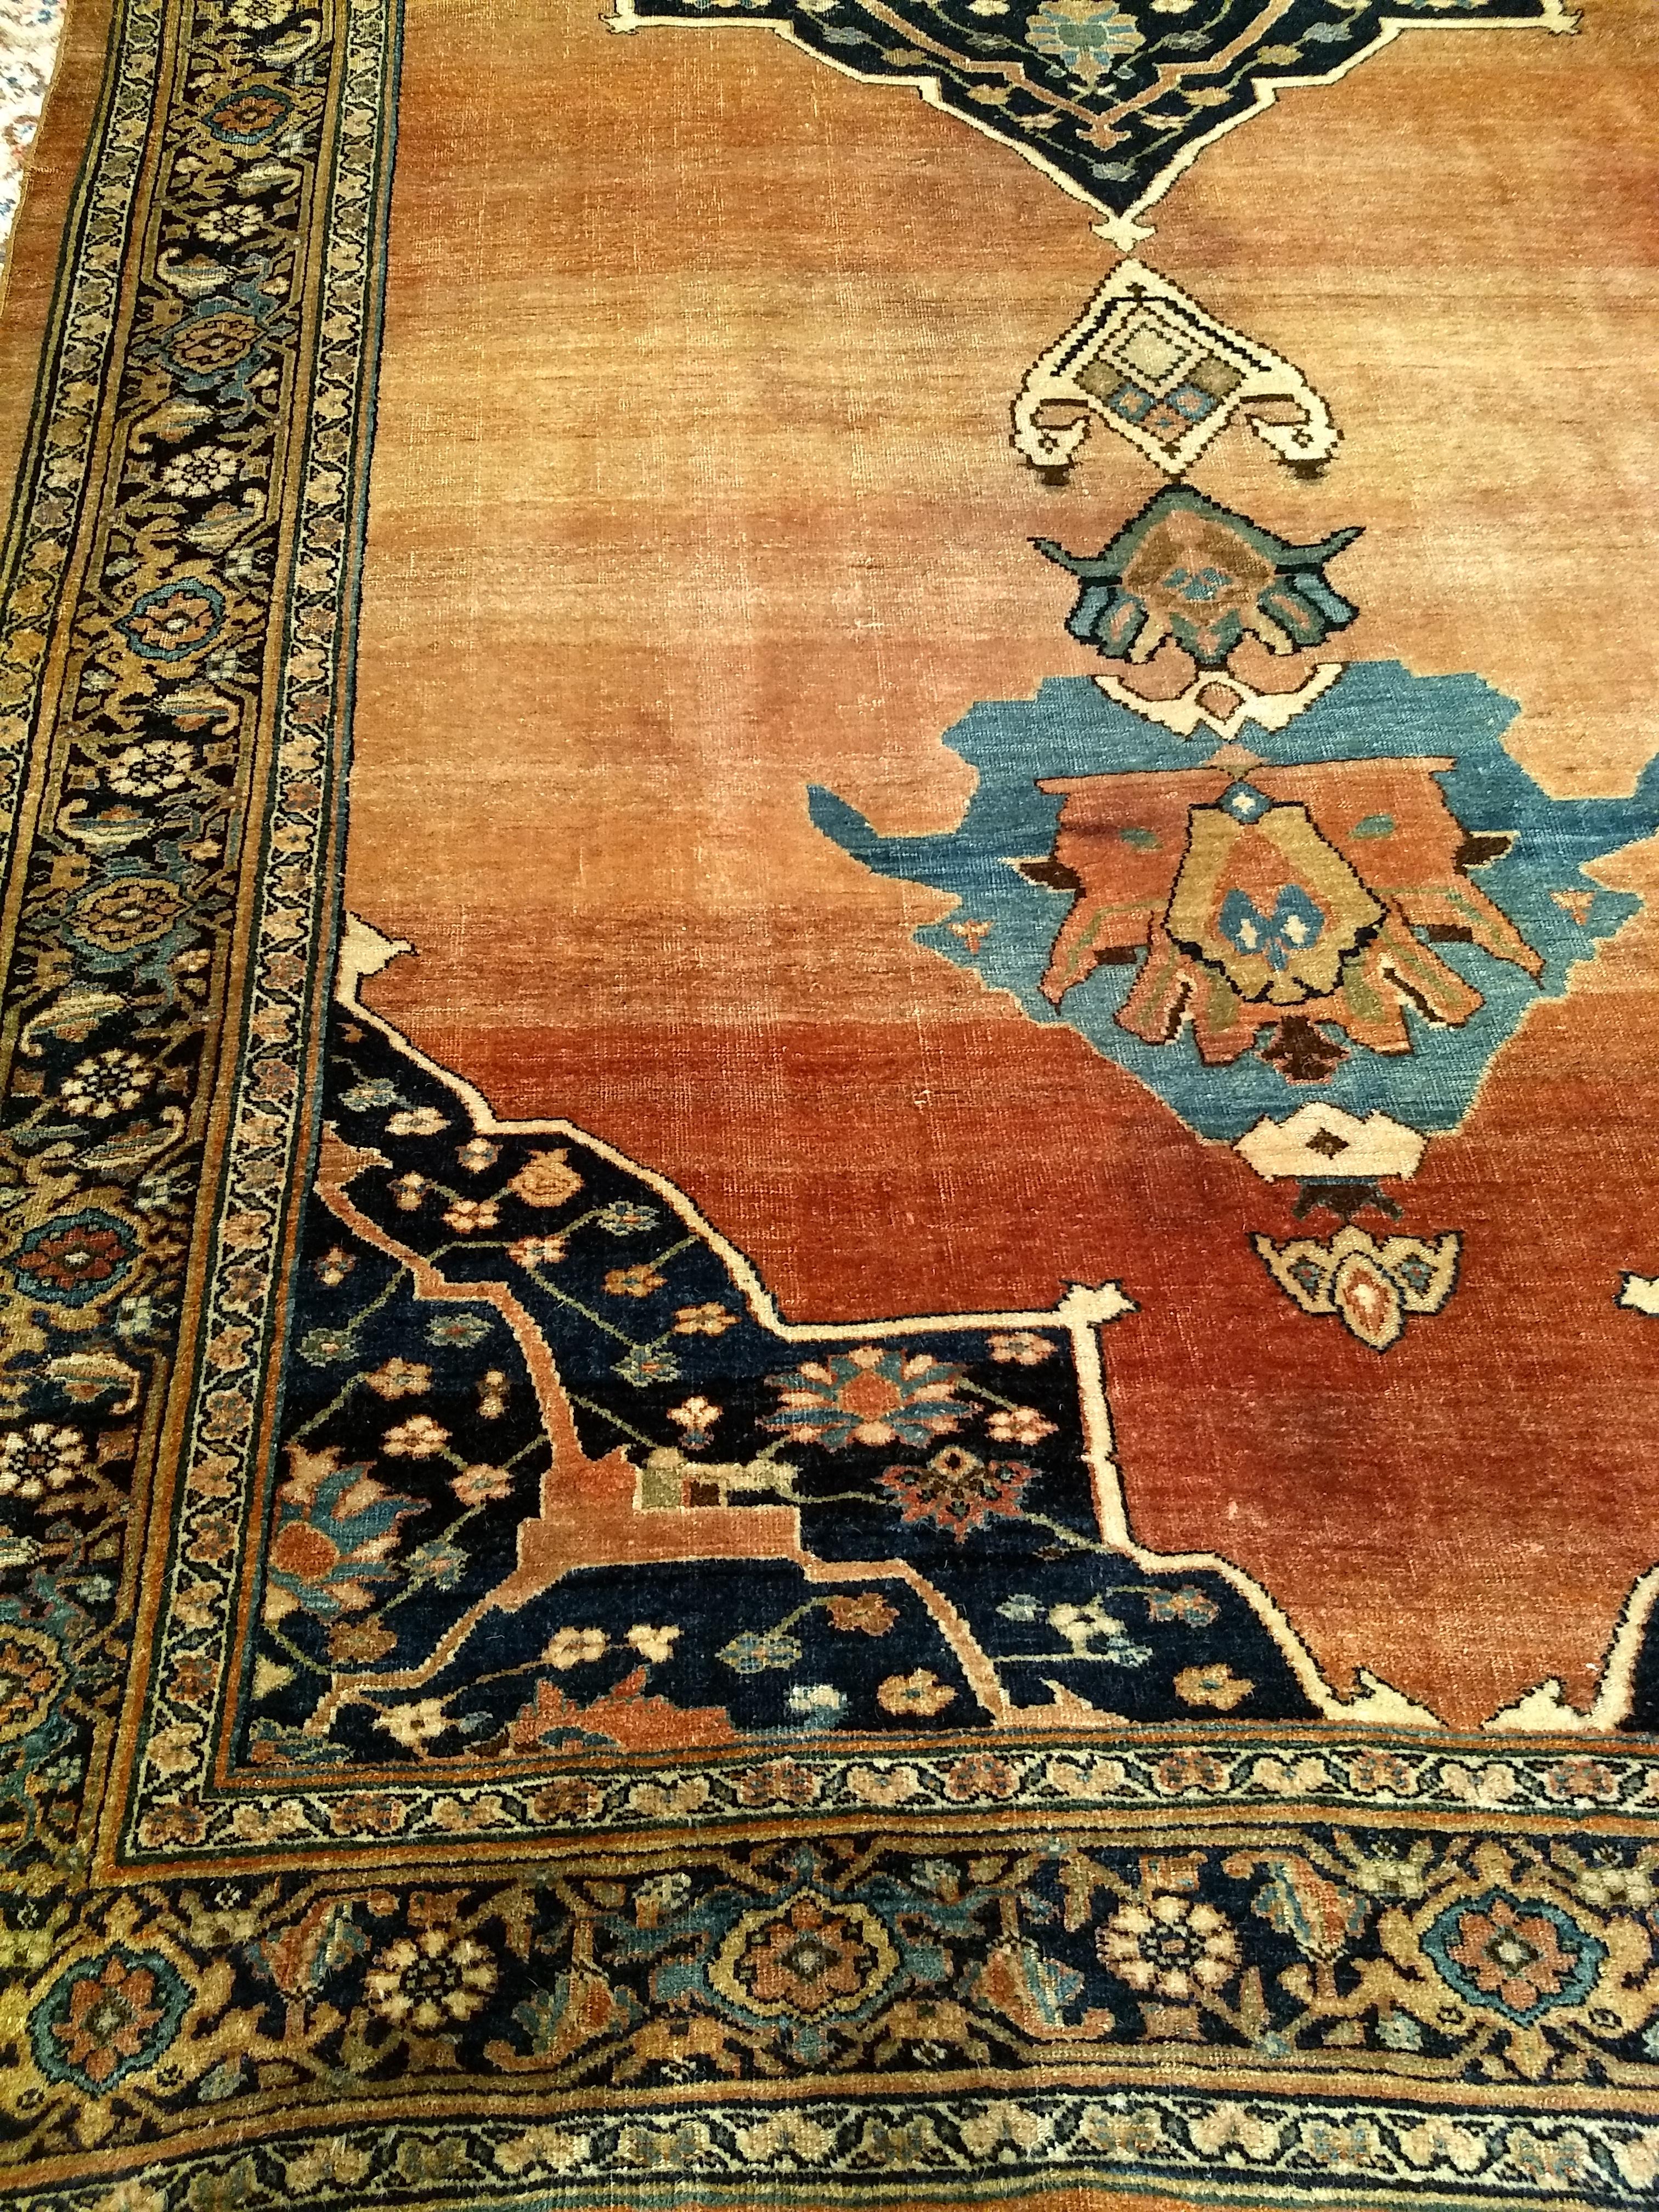 19th Century Persian Bidjar Gallery Rug in Brick-Red, Navy, Turquoise, Yellow For Sale 2